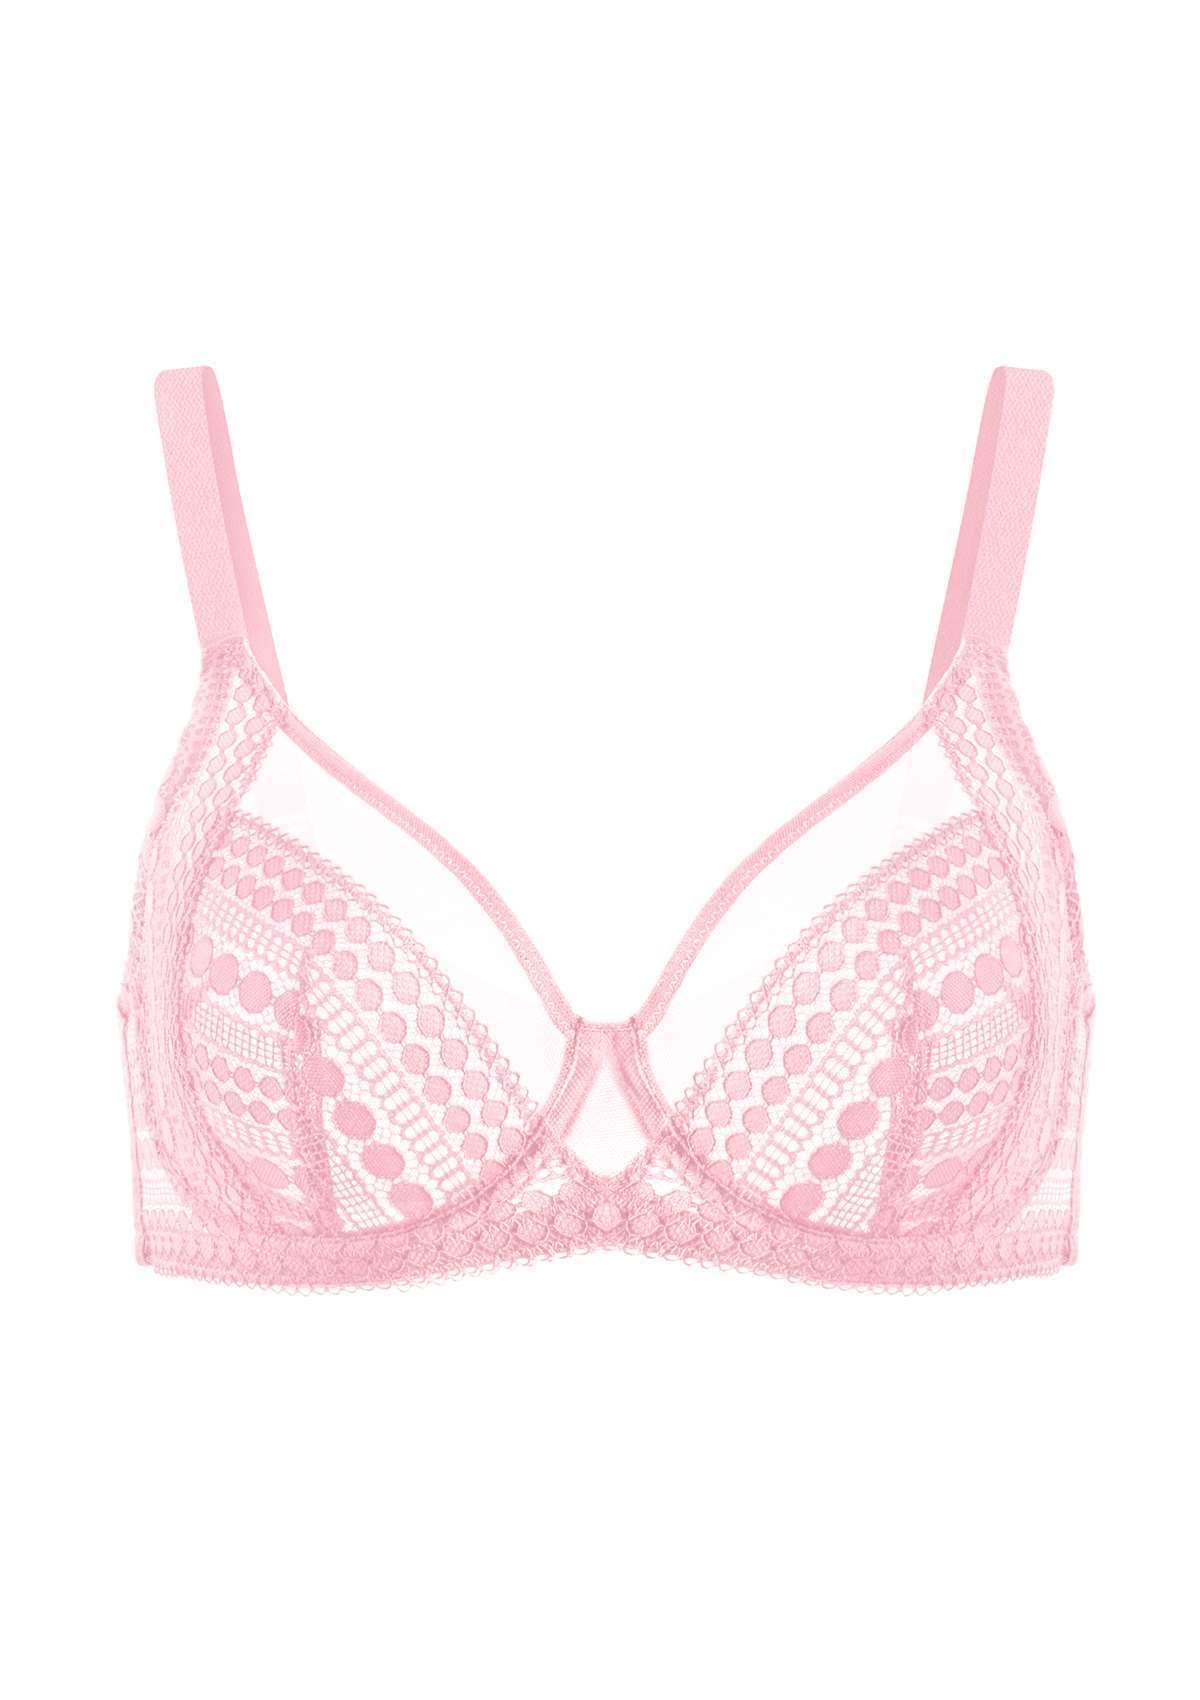 HSIA Heroine Lace Bra And Panties Set: Most Comfortable Supportive Bra - Pink / 44 / C